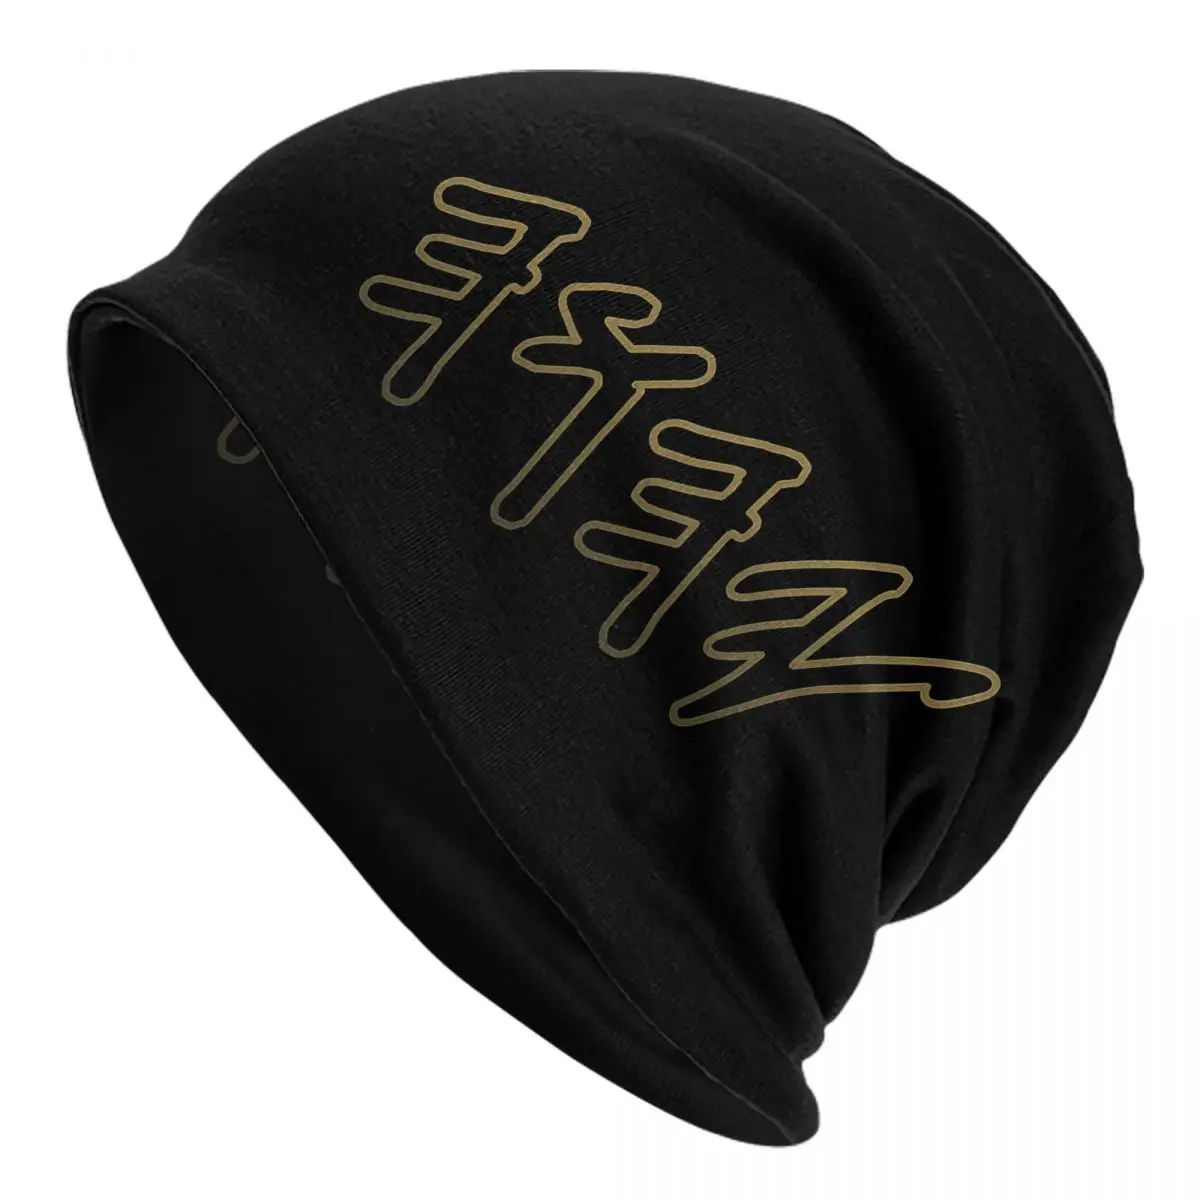 Old Hebrew Name Of God Yahuah Adult Men's Women's Knit Hat Keep warm winter Funny knitted hat